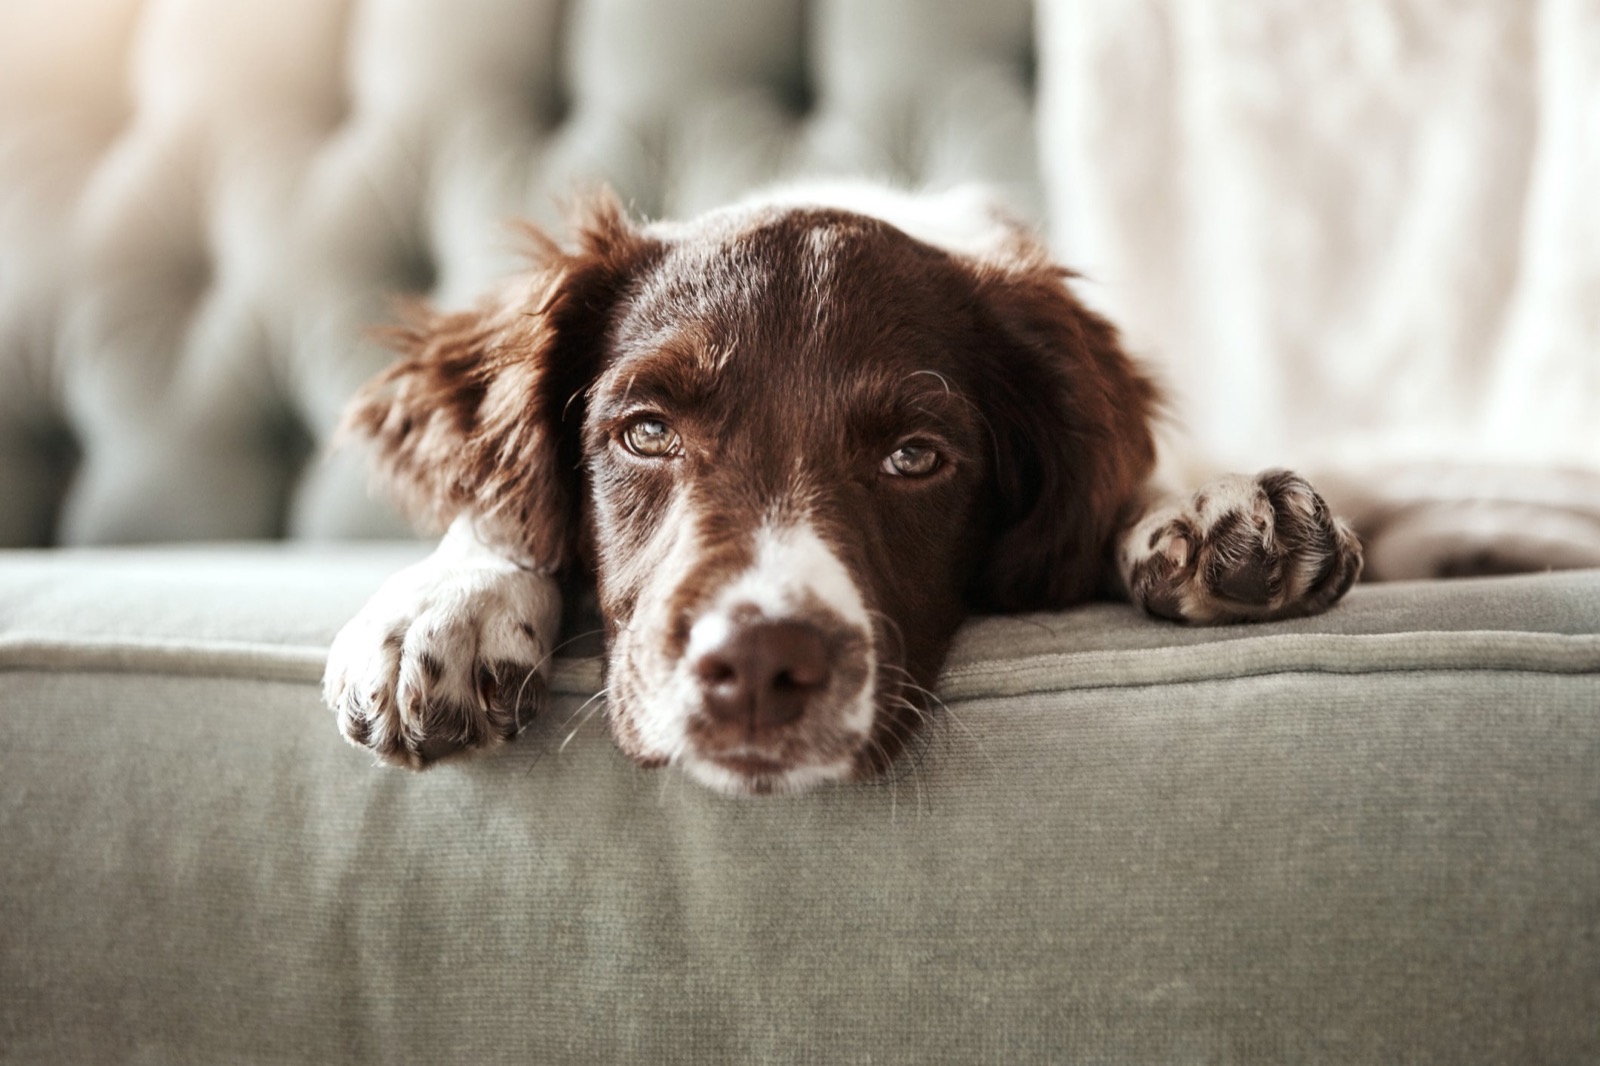 Are You an Empath? Pet Dog On Couch